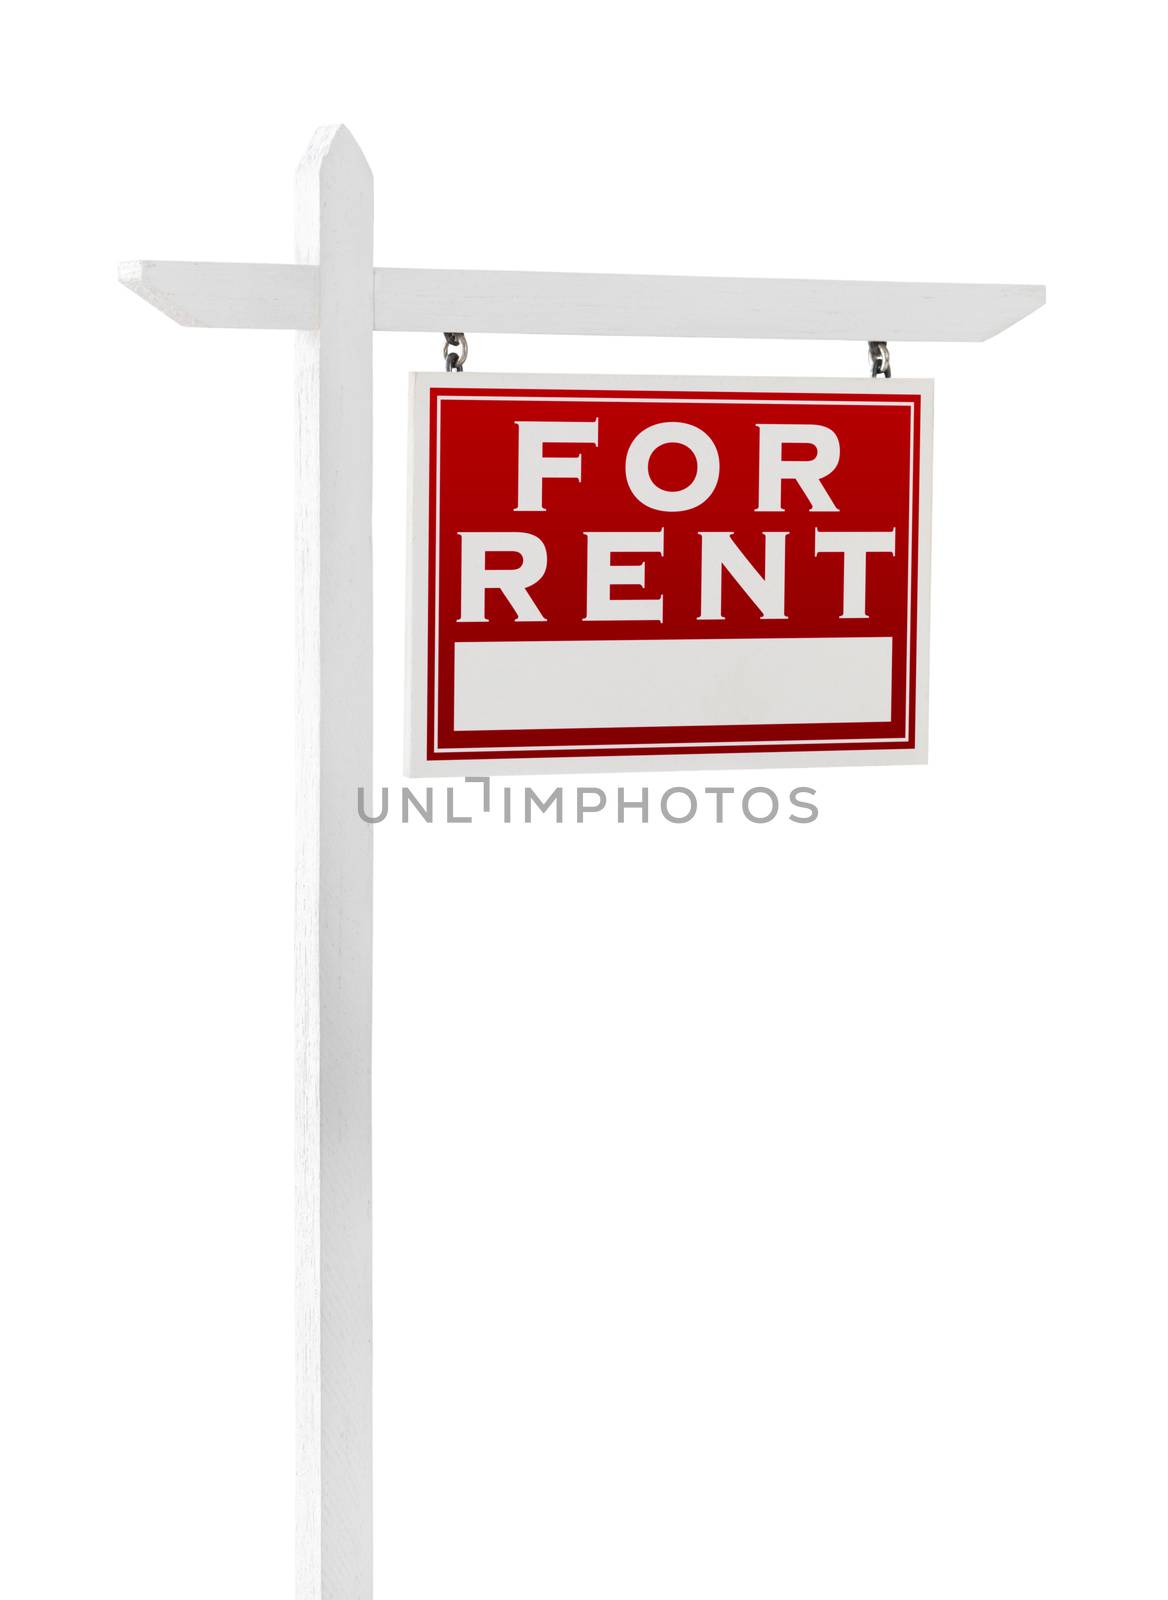 Right Facing For Rent Real Estate Sign Isolated on a White Backg by Feverpitched